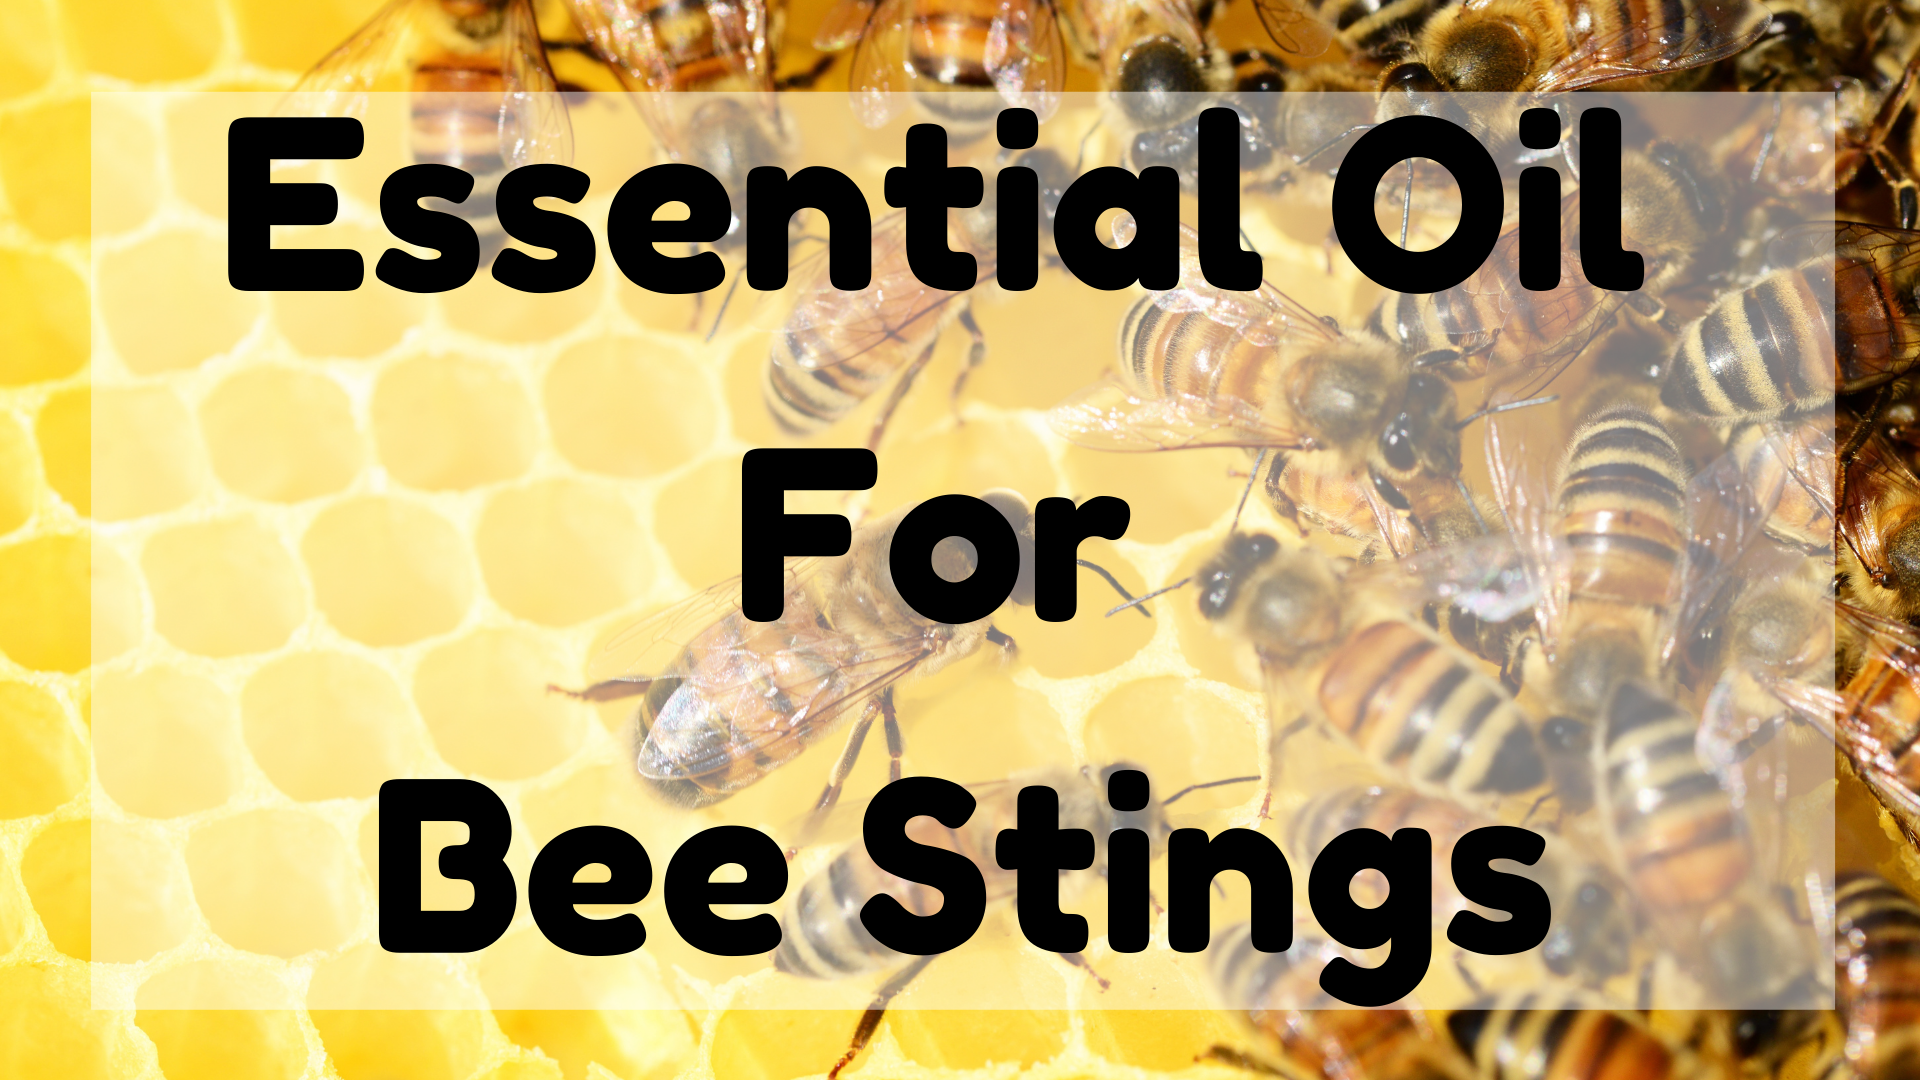 Essential Oil For Bee Stings